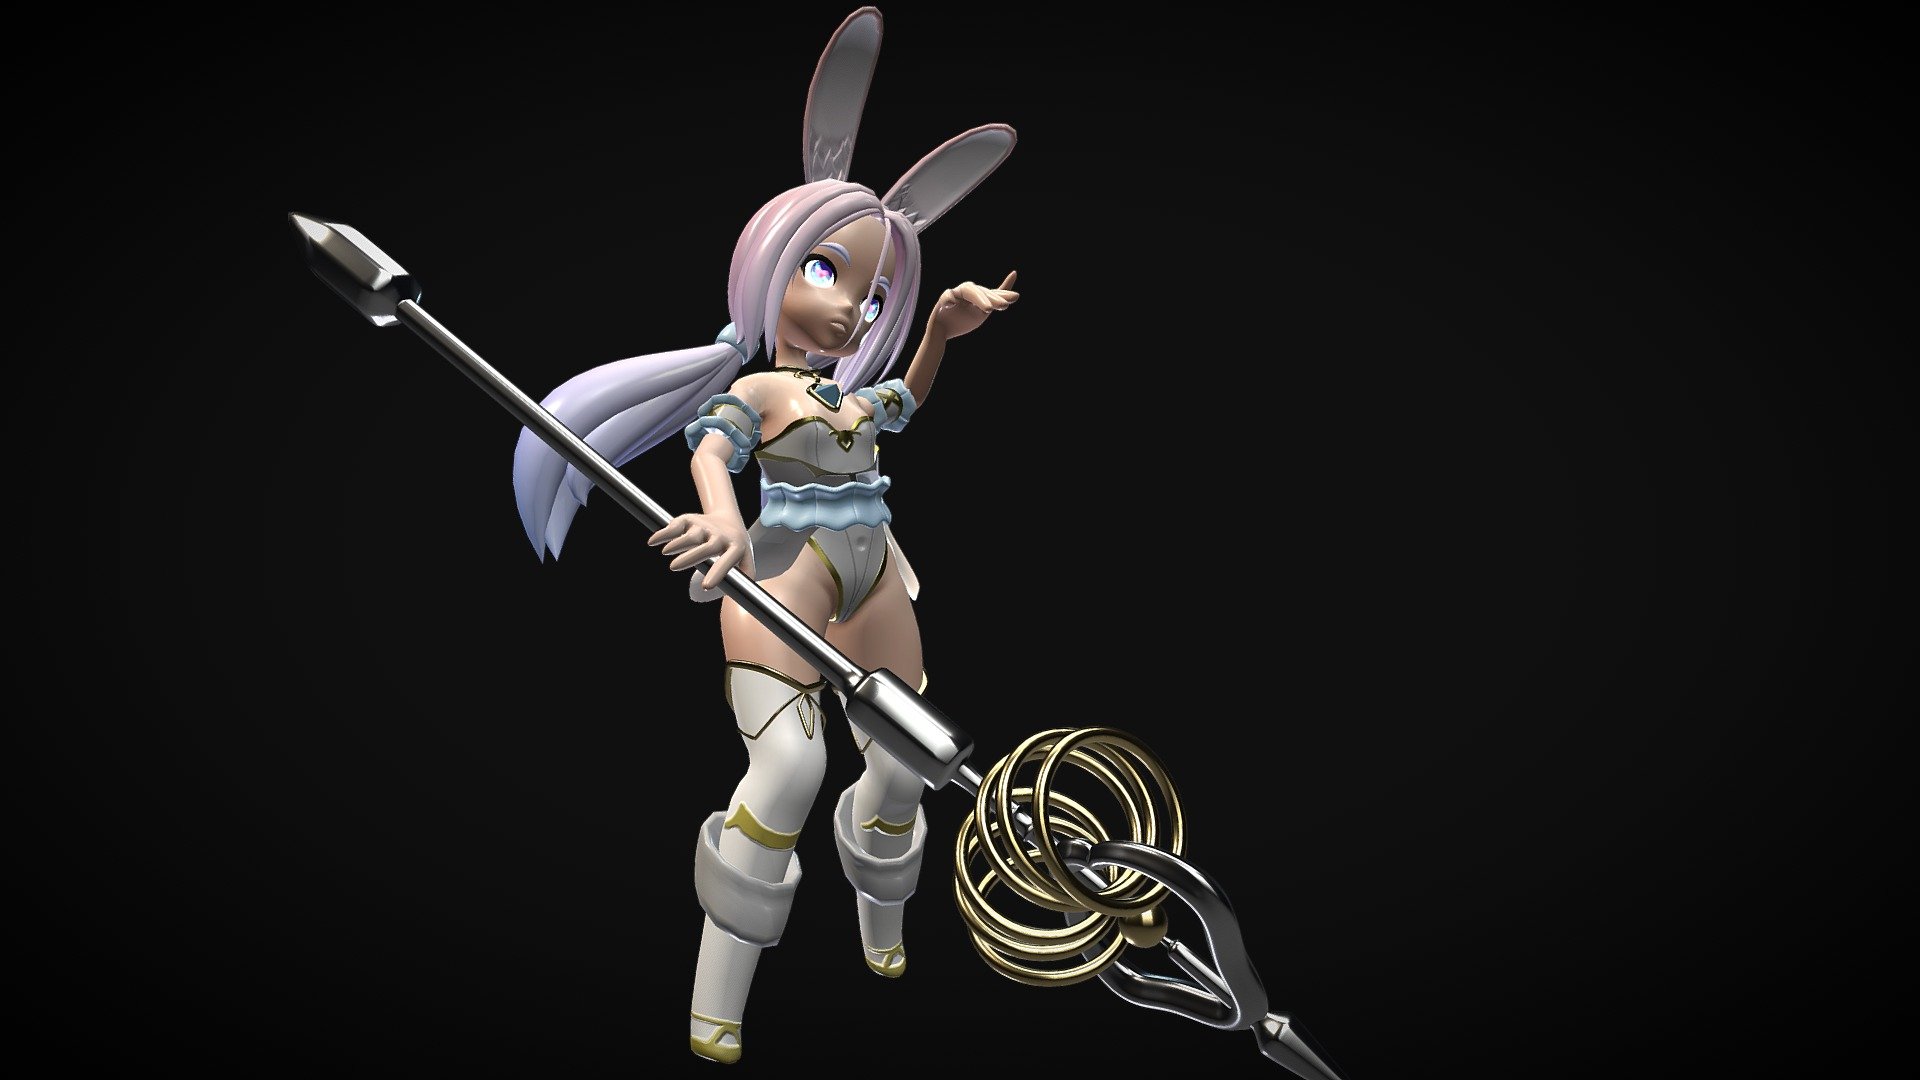 Bunny Girl Priest inspired by TERA ONLINE, with a simple rig painted in Substance Painter!

Including is :

-Textures
-Simple Rig
-Blender Files

Thank you for viewing :) Be sure to check out my twitter for WIP pics! - Bunny Priest - Download Free 3D model by Shortskirts (@Shortestskirts) 3d model